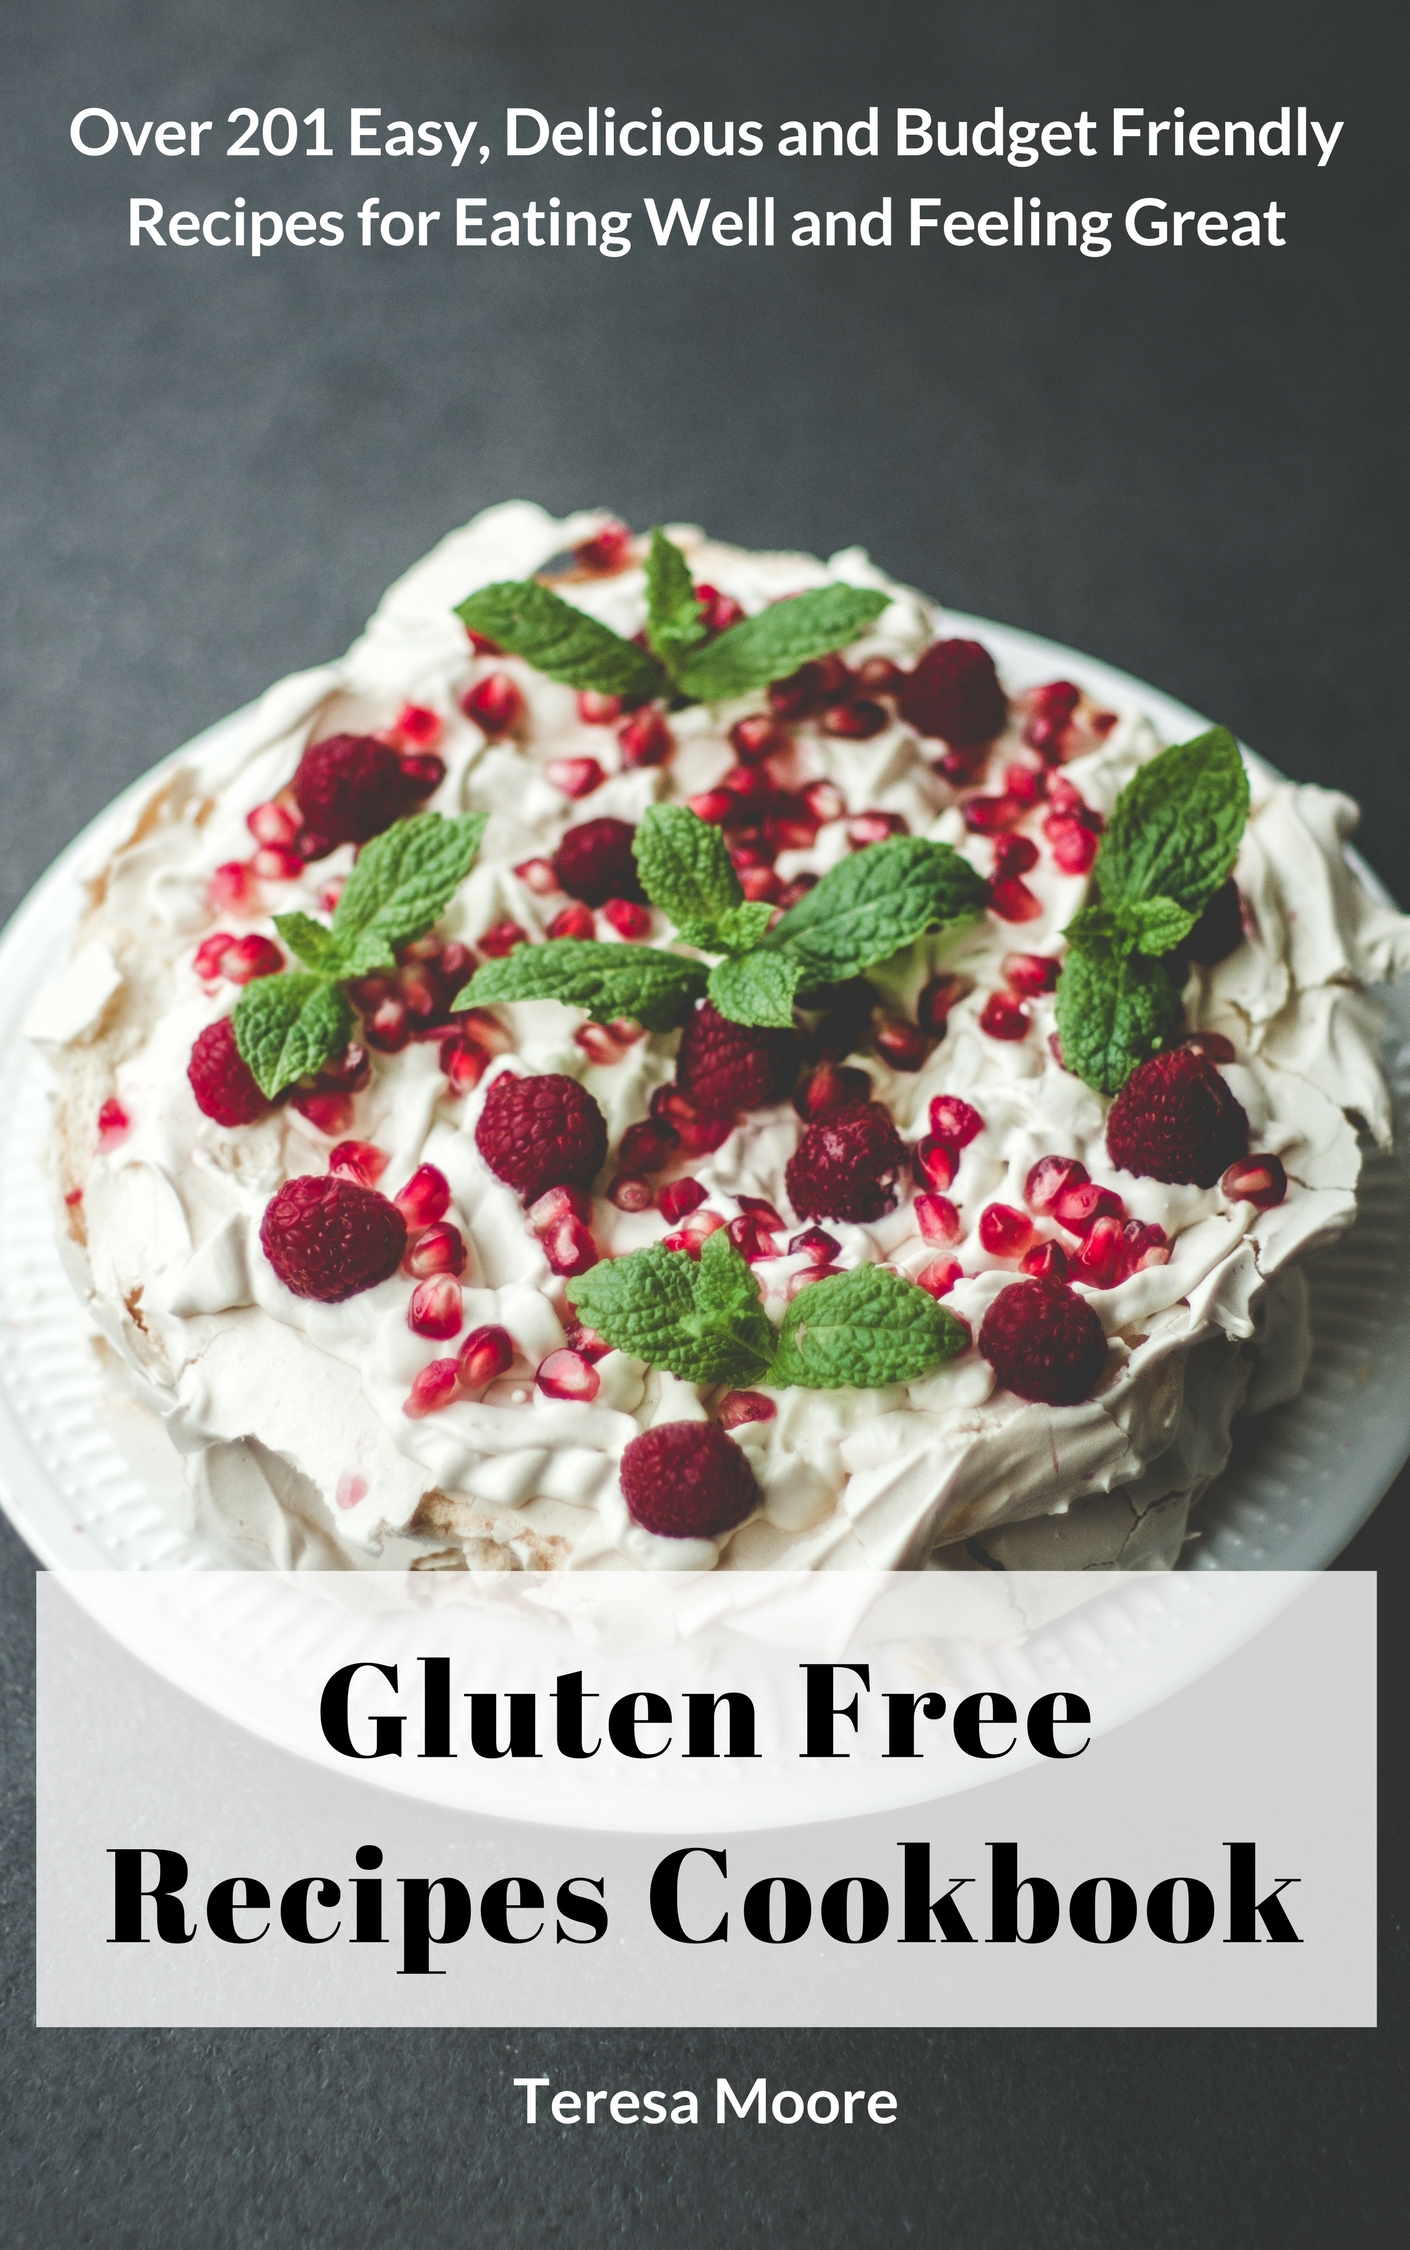 FREE: Gluten Free Recipes Cookbook: Over 201 Easy, Delicious and Budget Friendly Recipes for Eating Well and Feeling Great by Teresa Moore